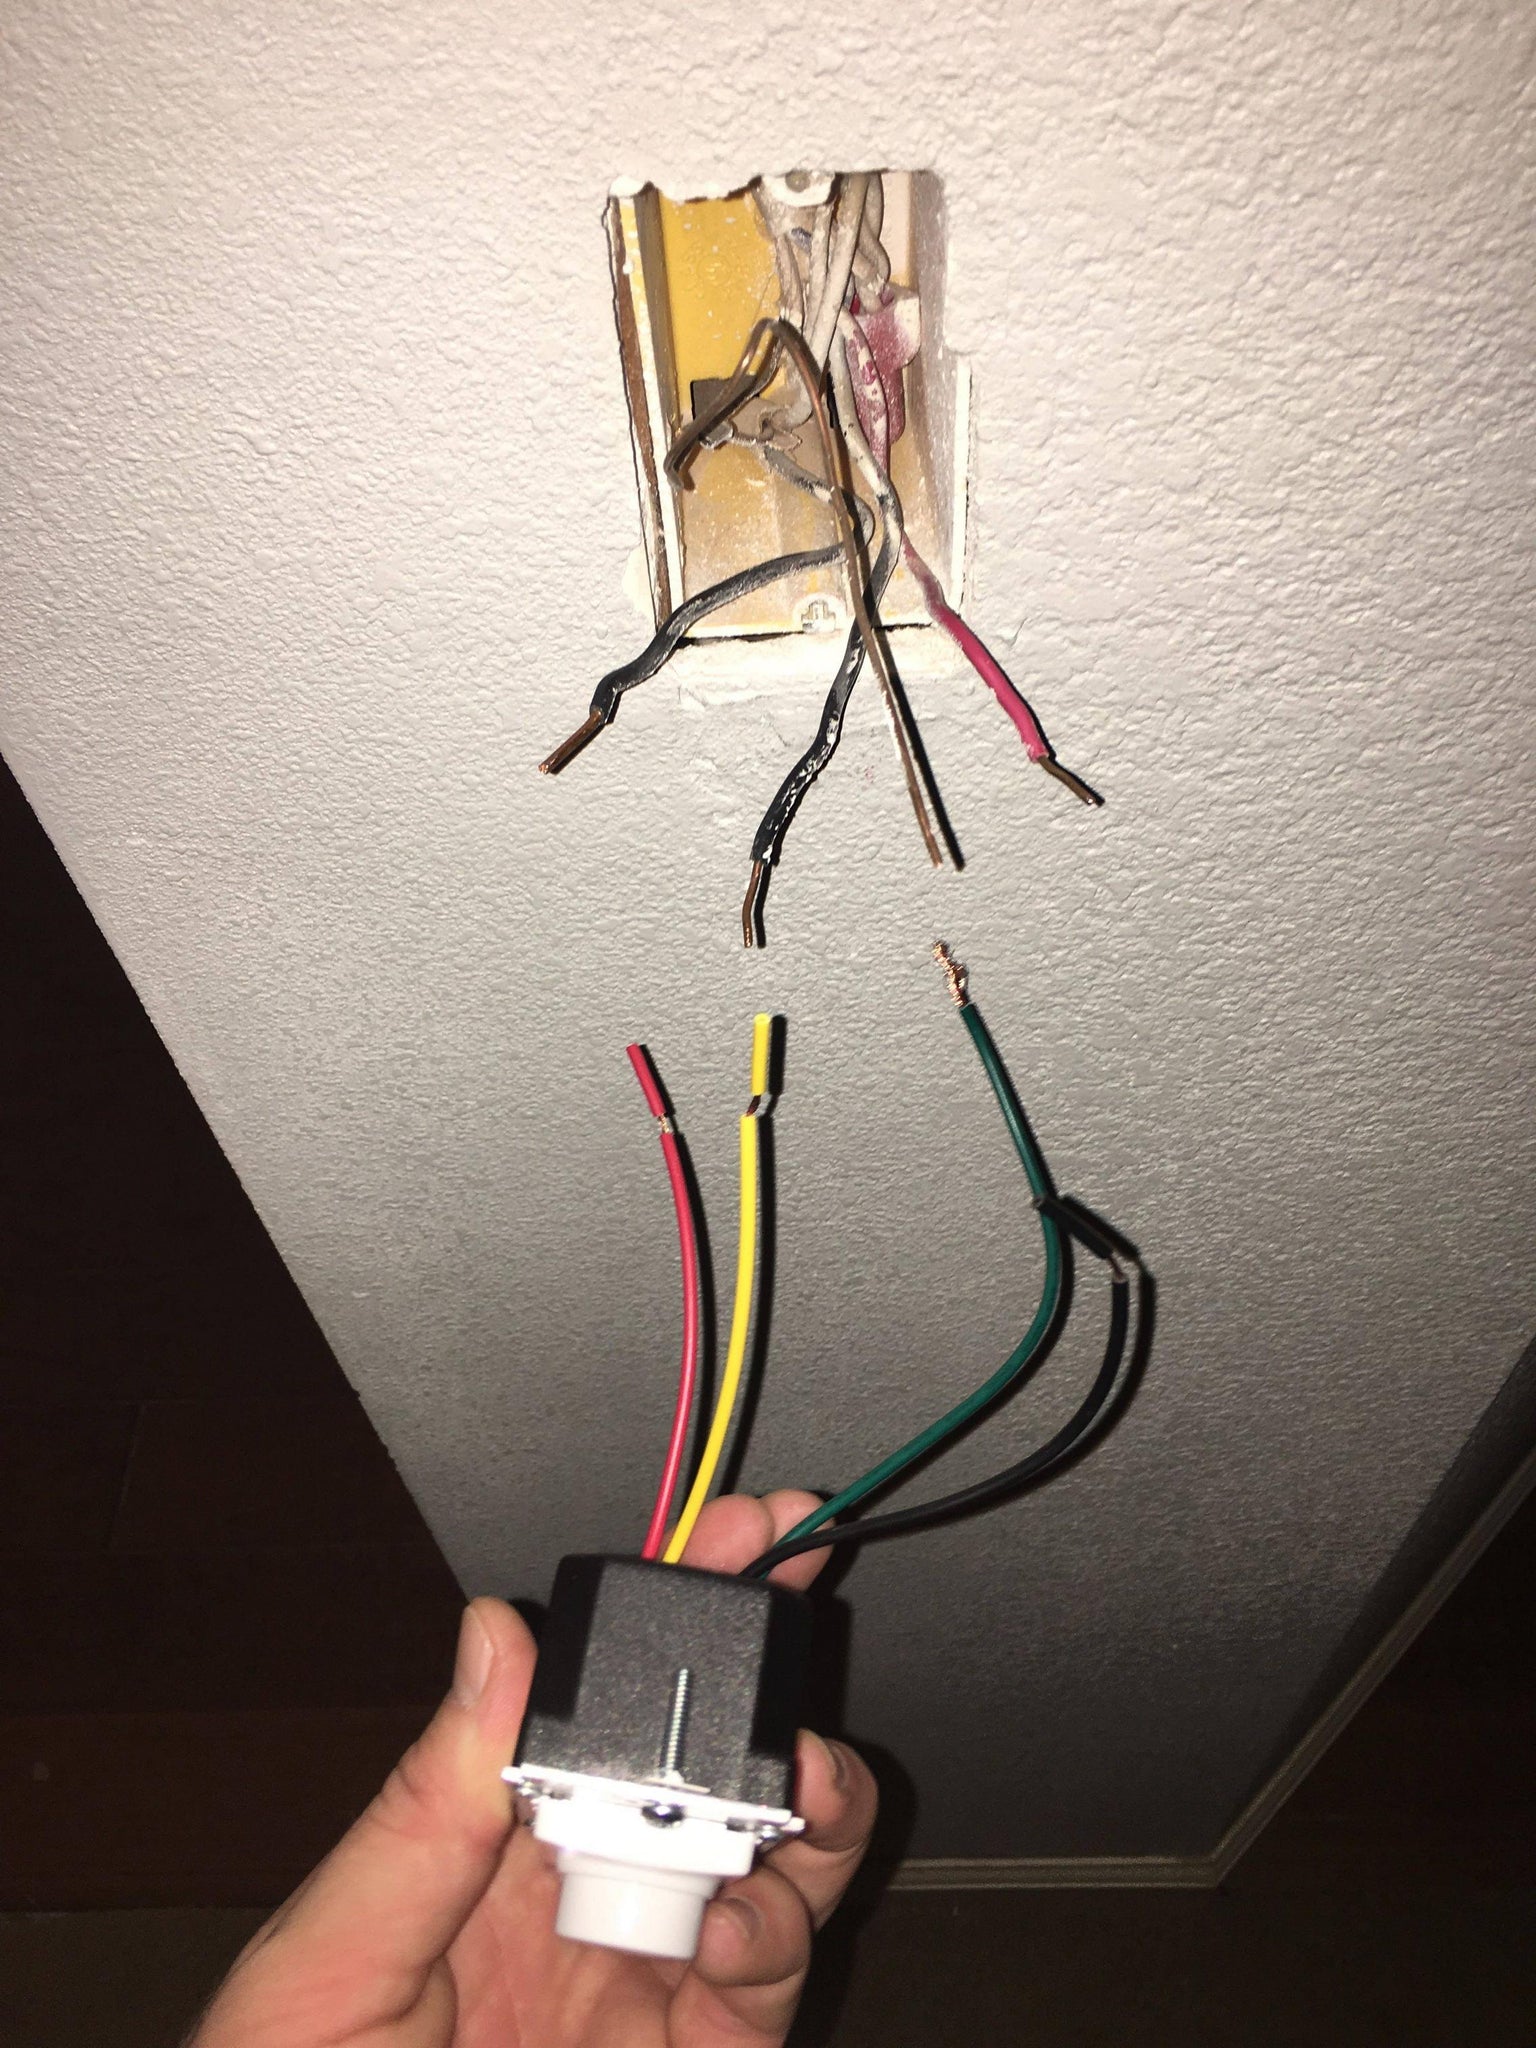 Trying to hook up dimmer/fan switch but have an extra wire?